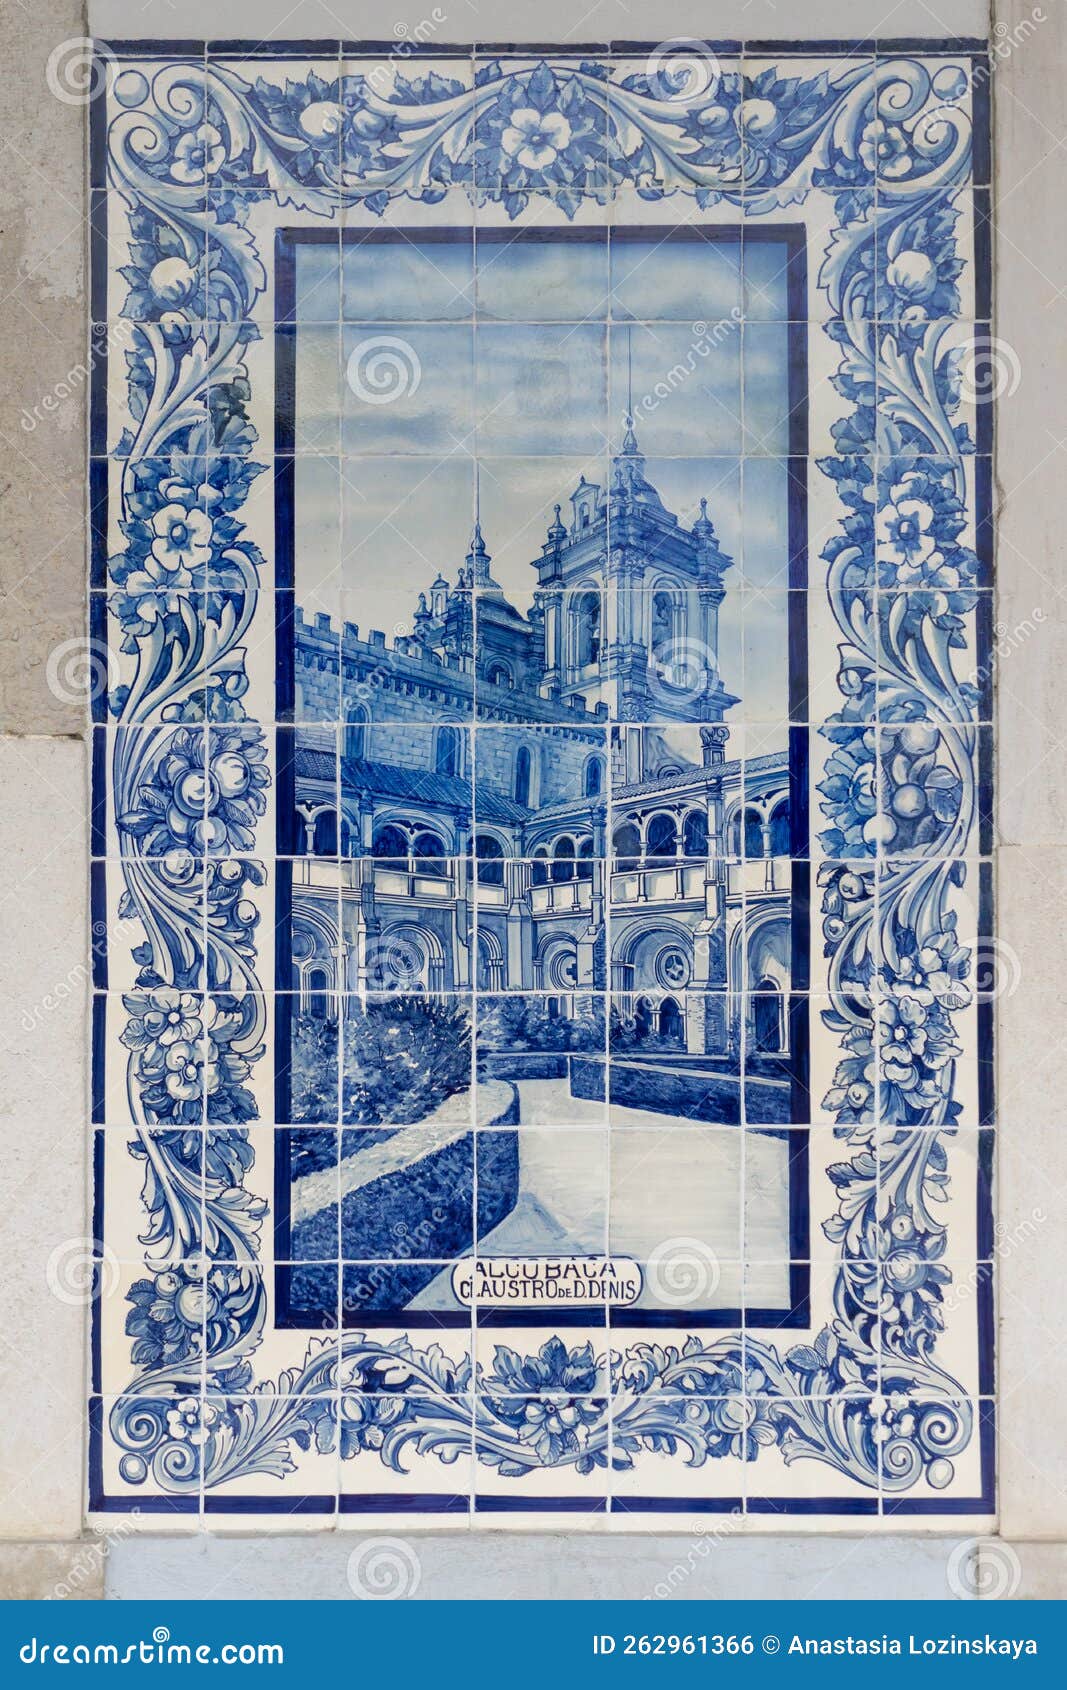 old portuguese azulejo tile with the image of claustro de d. dinis of alcobaca